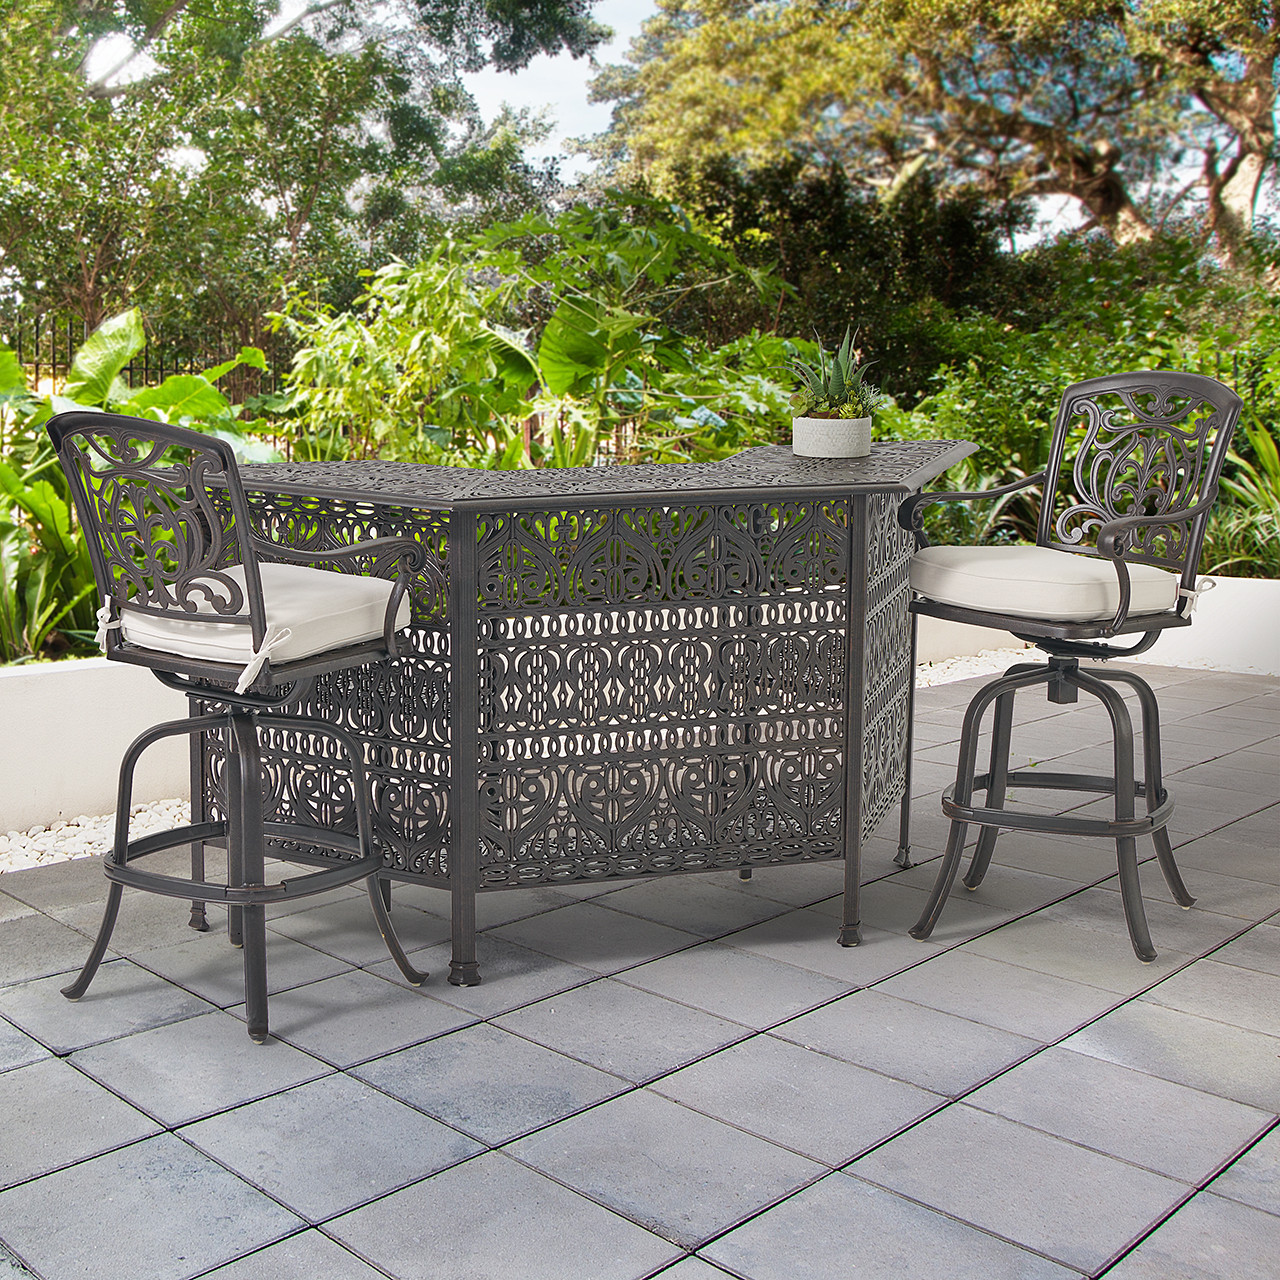 Verona Desert Bronze Cast Aluminum with Cushions 3 Piece Party Set + 82 in. Party Bar